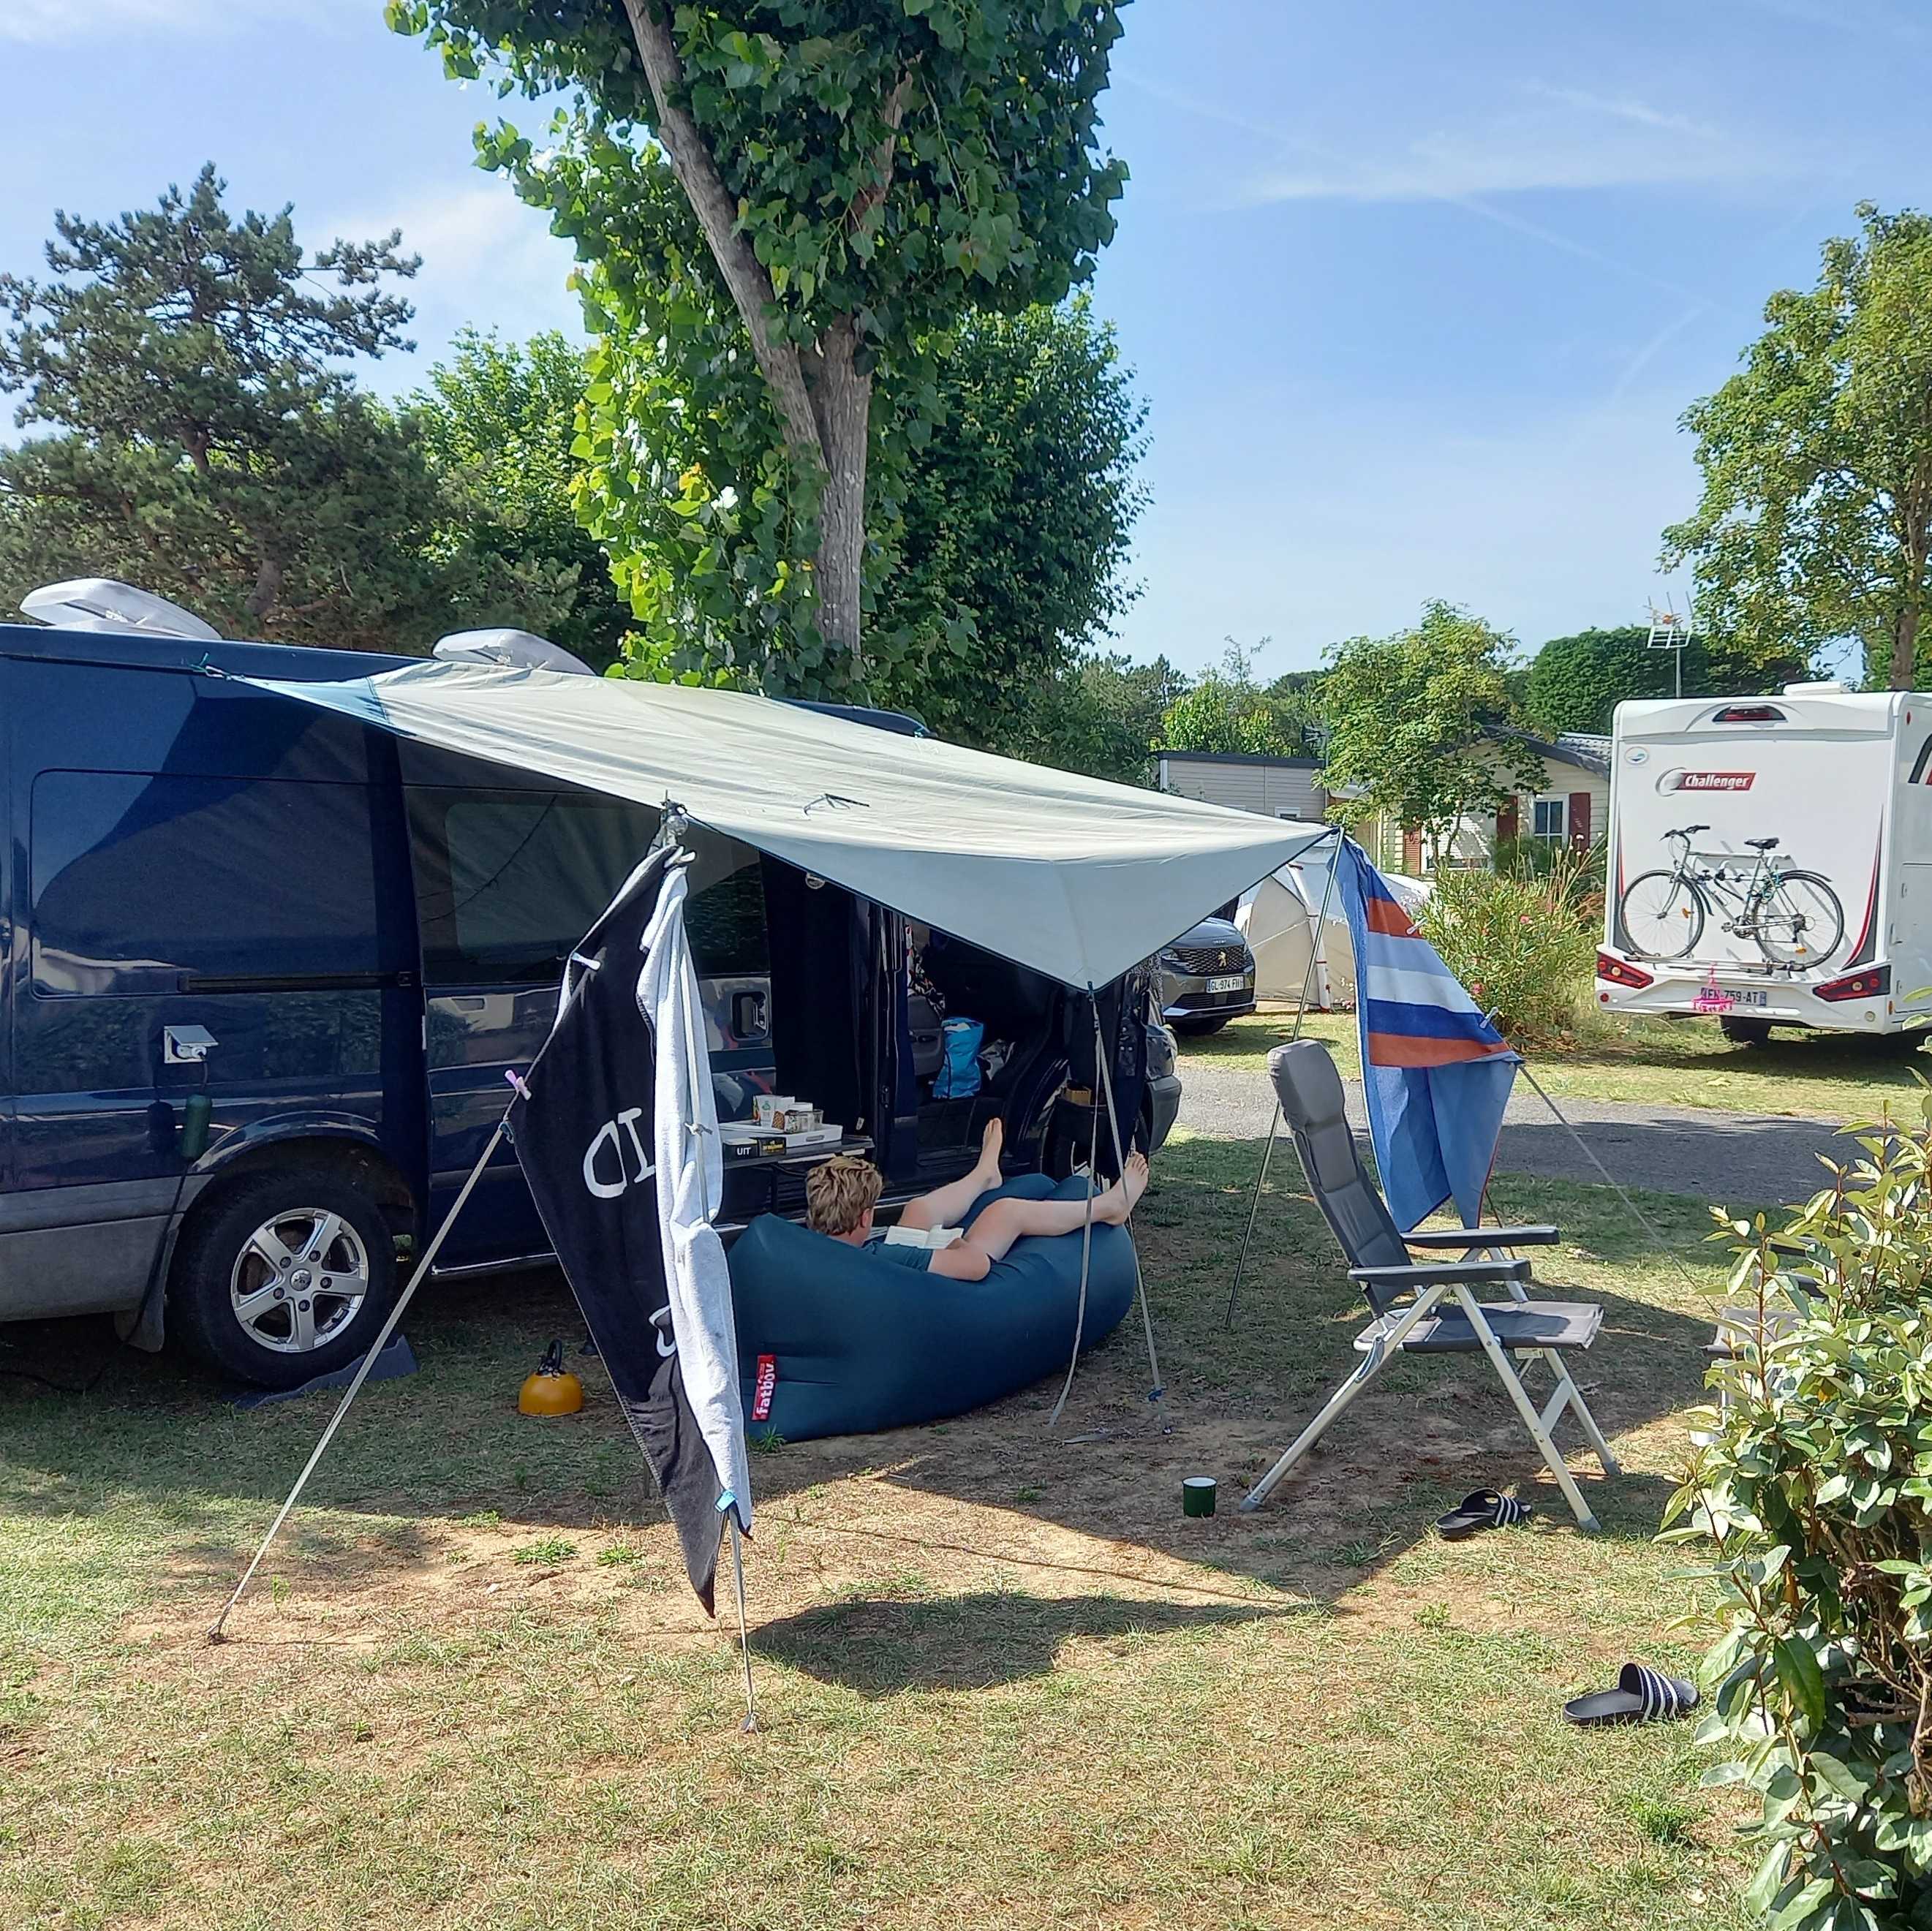 Pitch camper van  – 7.50 m  (water, electricity, drain, 2 people and 1 vehicle) 1/2 Ppl. 1/2 pers.